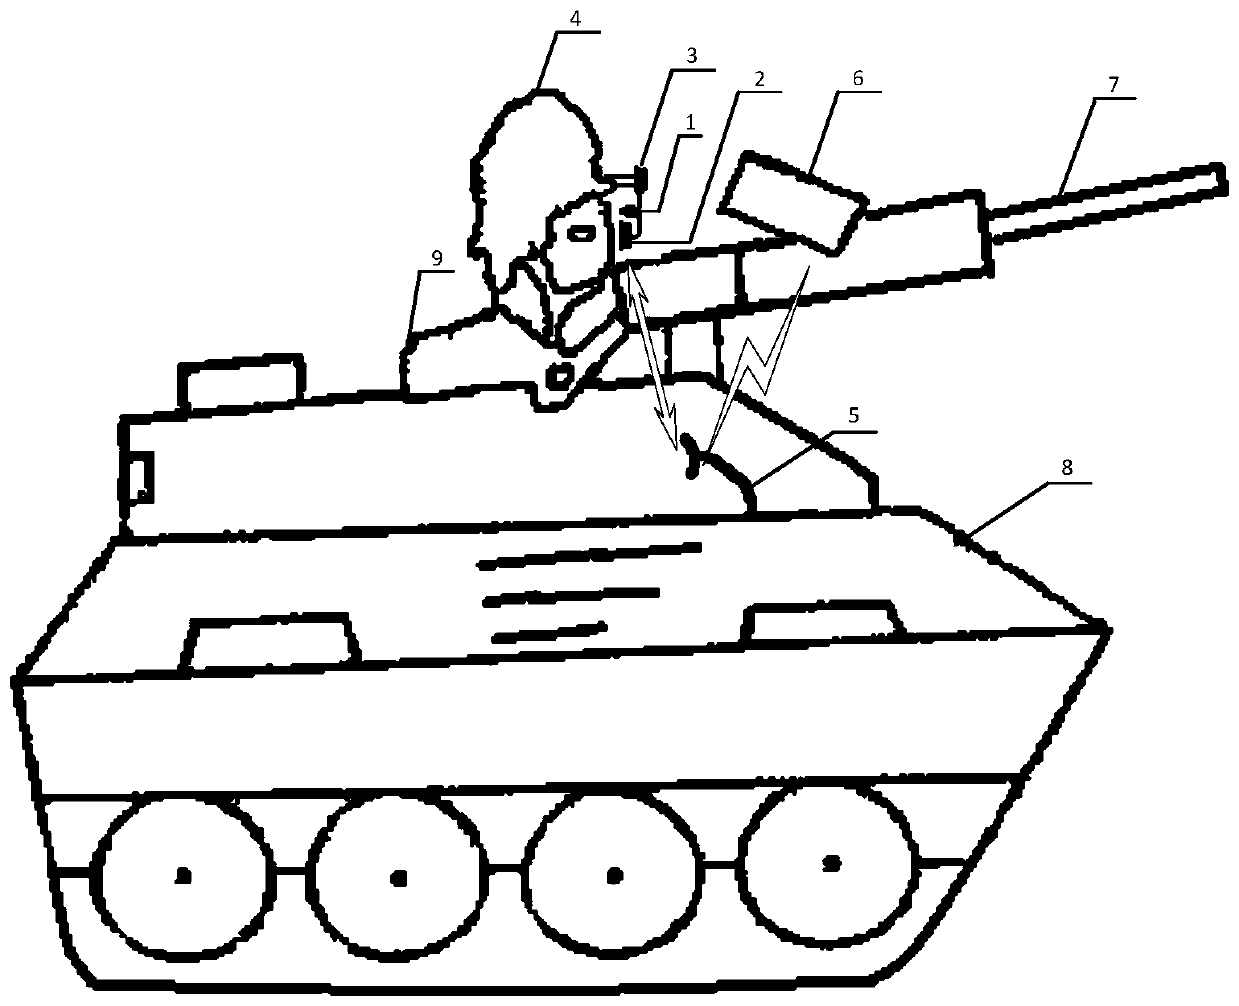 Tracked vehicle gun aiming method based on line-of-sight tracking